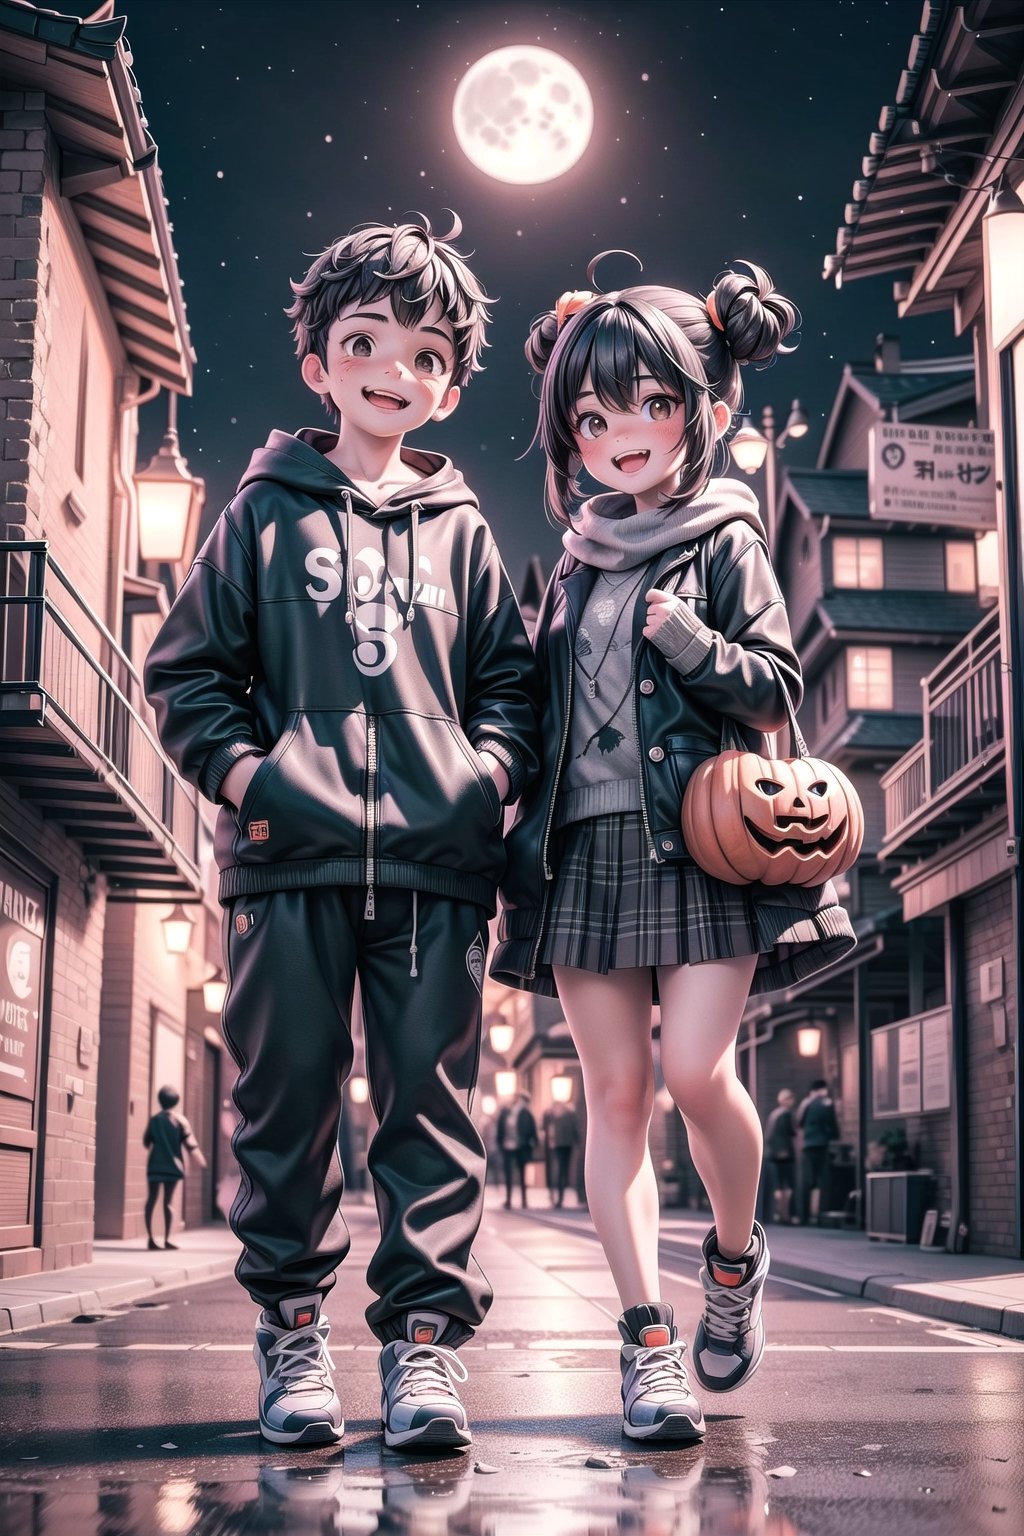 3d,1boy and 1girl, brown eyes,brown hair,korean,Create a mischievous image of two kids playing pranks on Halloween night, with a full moon casting eerie shadows on the deserted streets, happy, smiling, eye contact viewer,